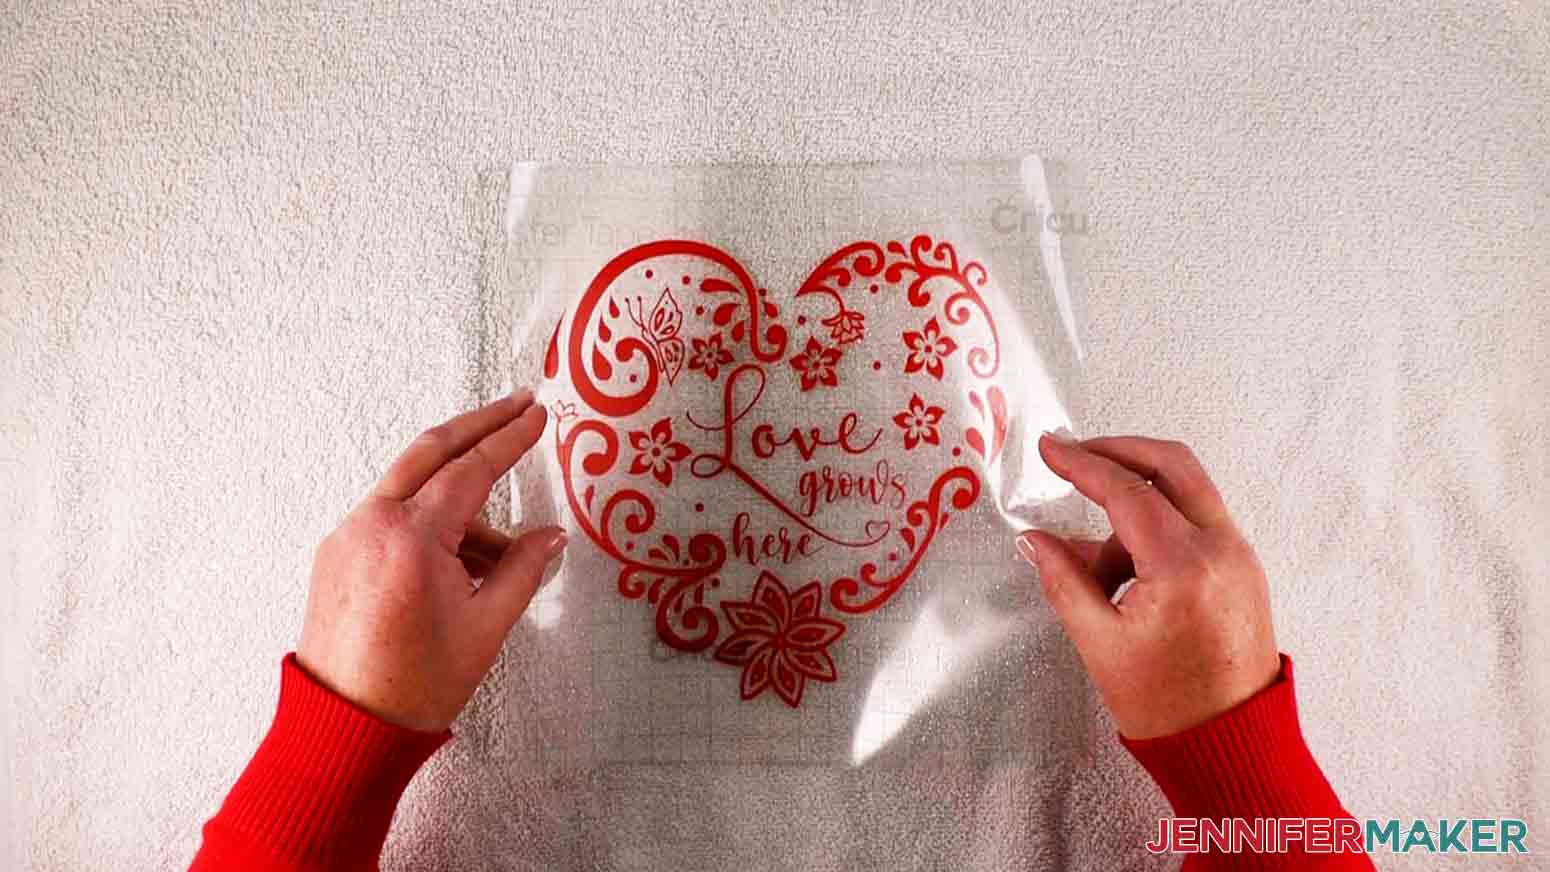 Aligning intricate hearts decal on glass with tape